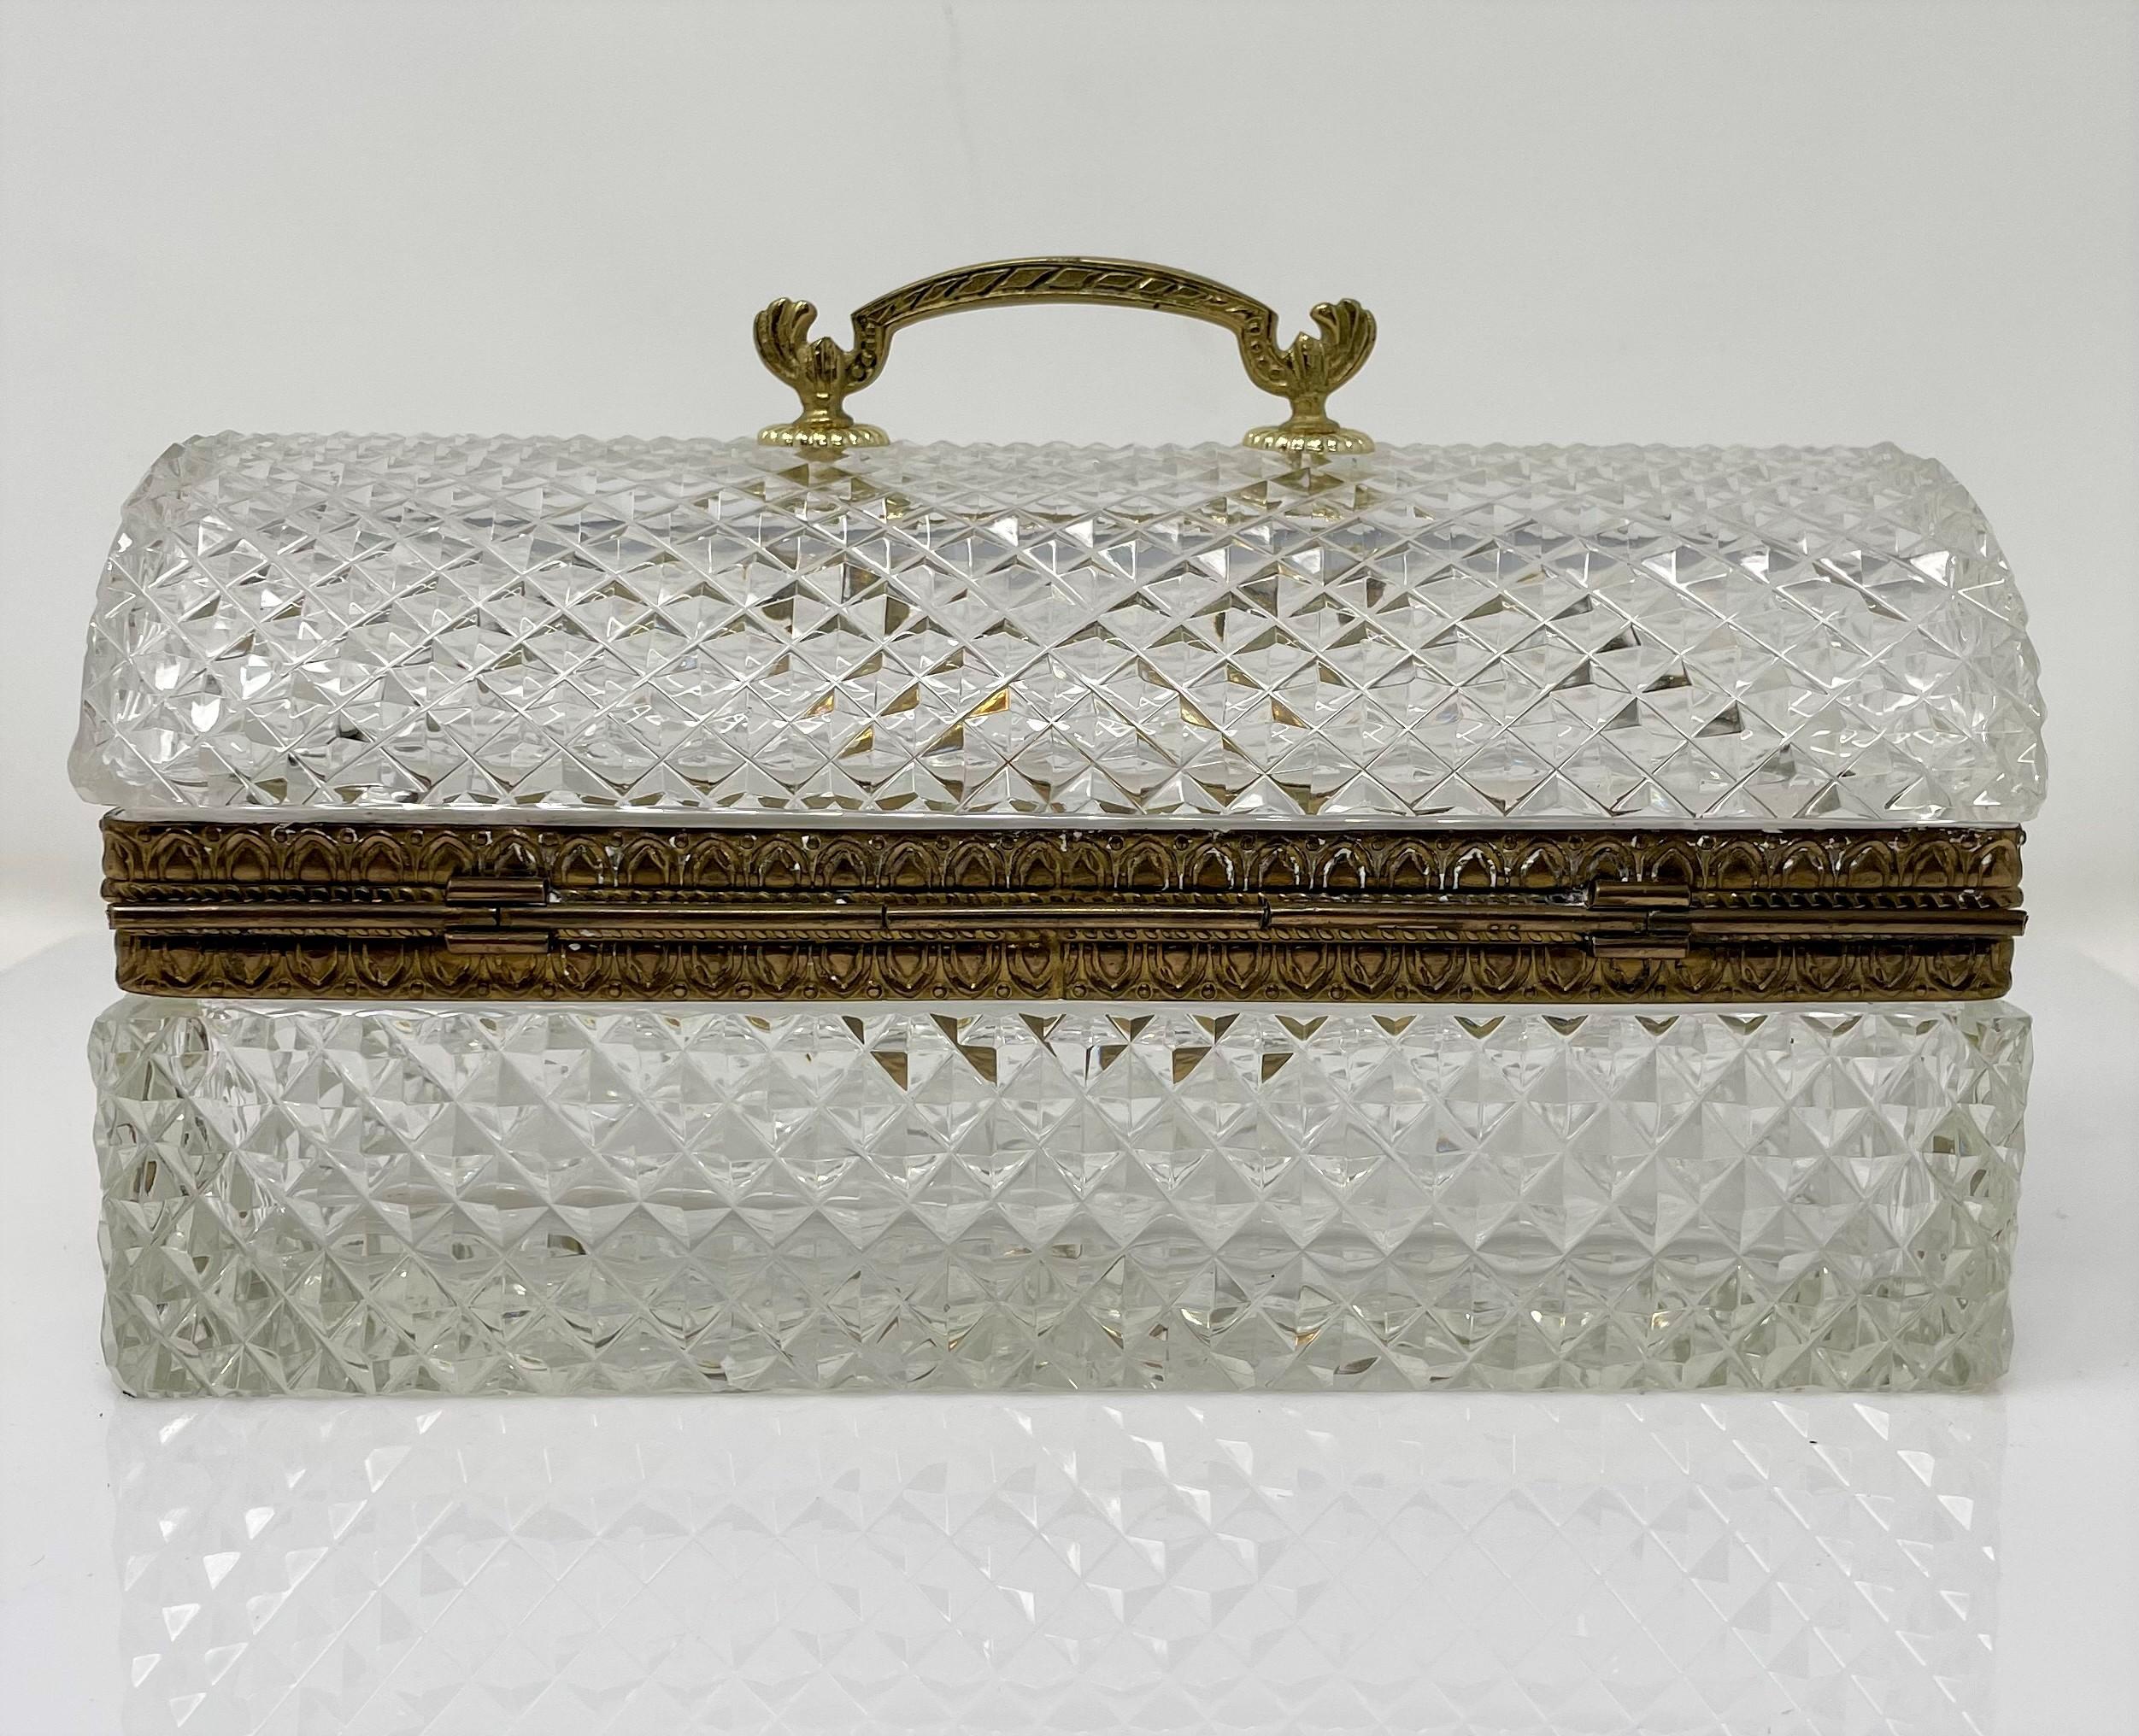 20th Century Antique French Cut Crystal Jewel Box with Bronze D'ore Mounts, Circa 1900-1920